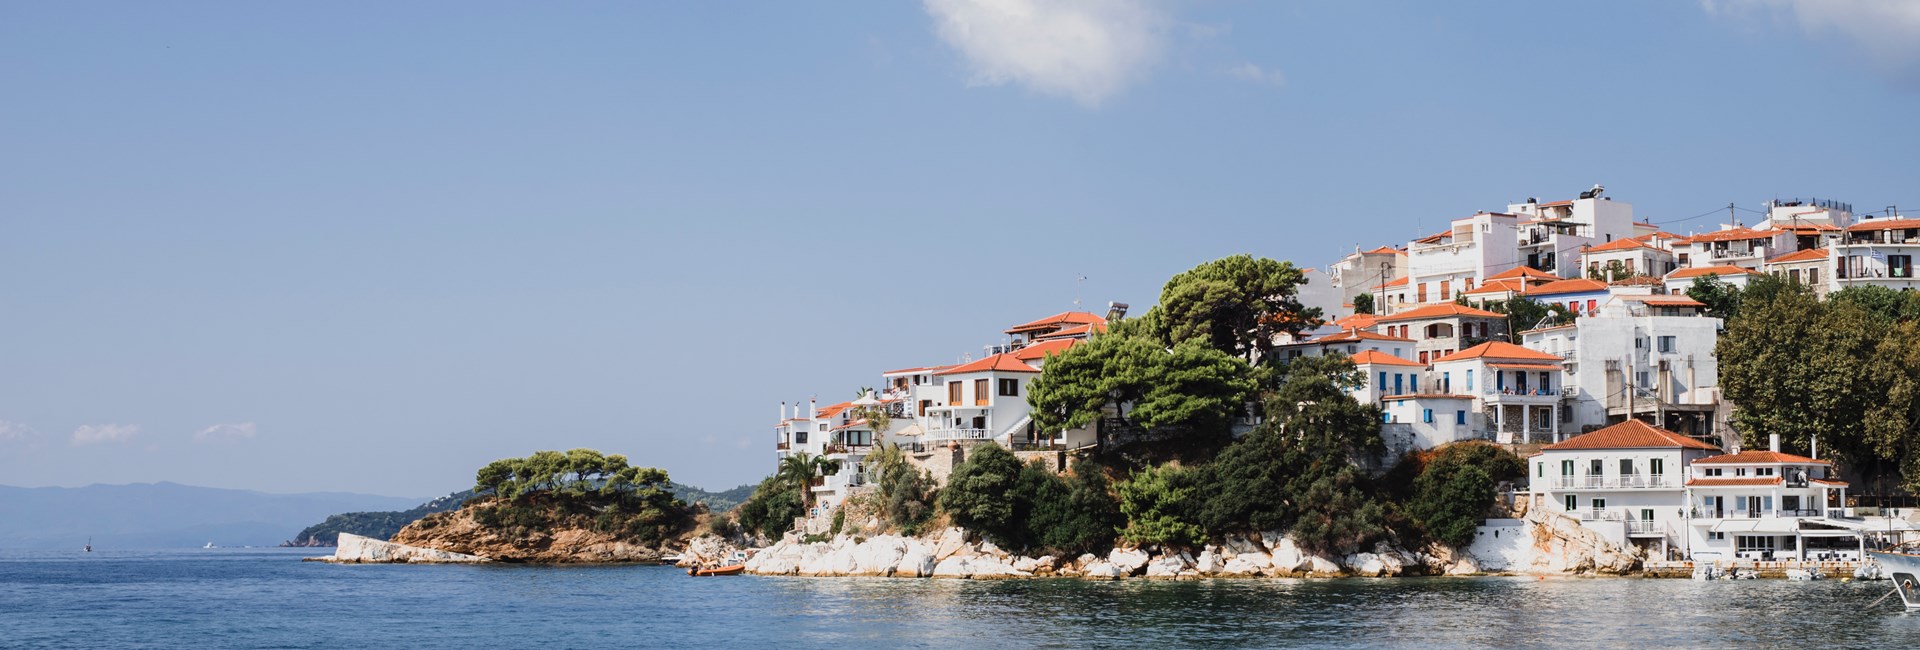 white buildings with orange roofs on Skiathos island by blue sea